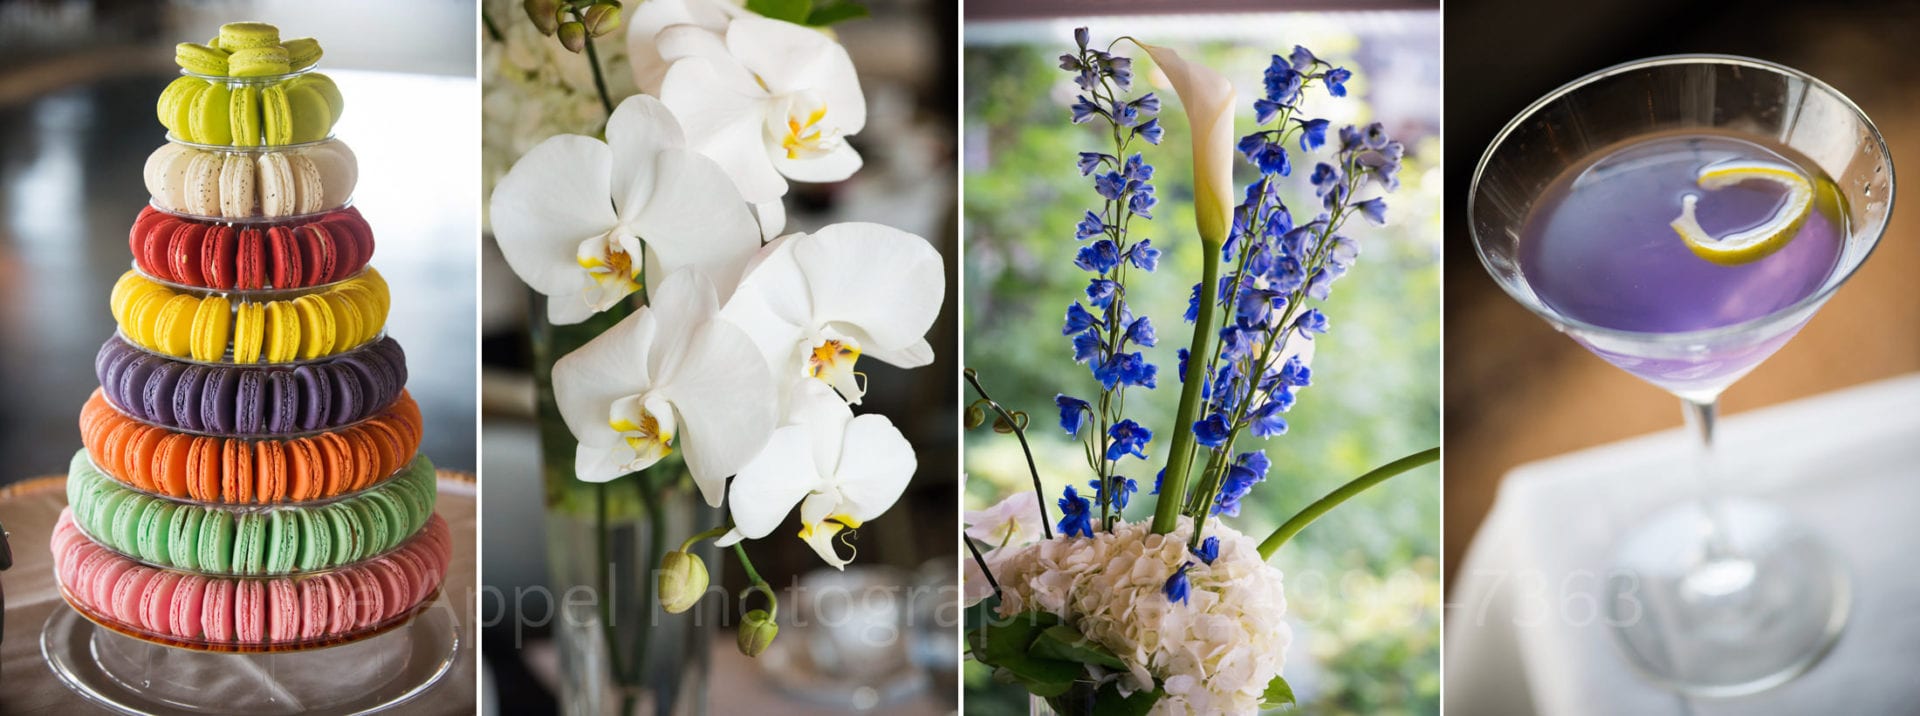 Four photos: a colorful tree made of macarons, a vase of white orchids, bluebells, and a purple drink in a martini glass. 